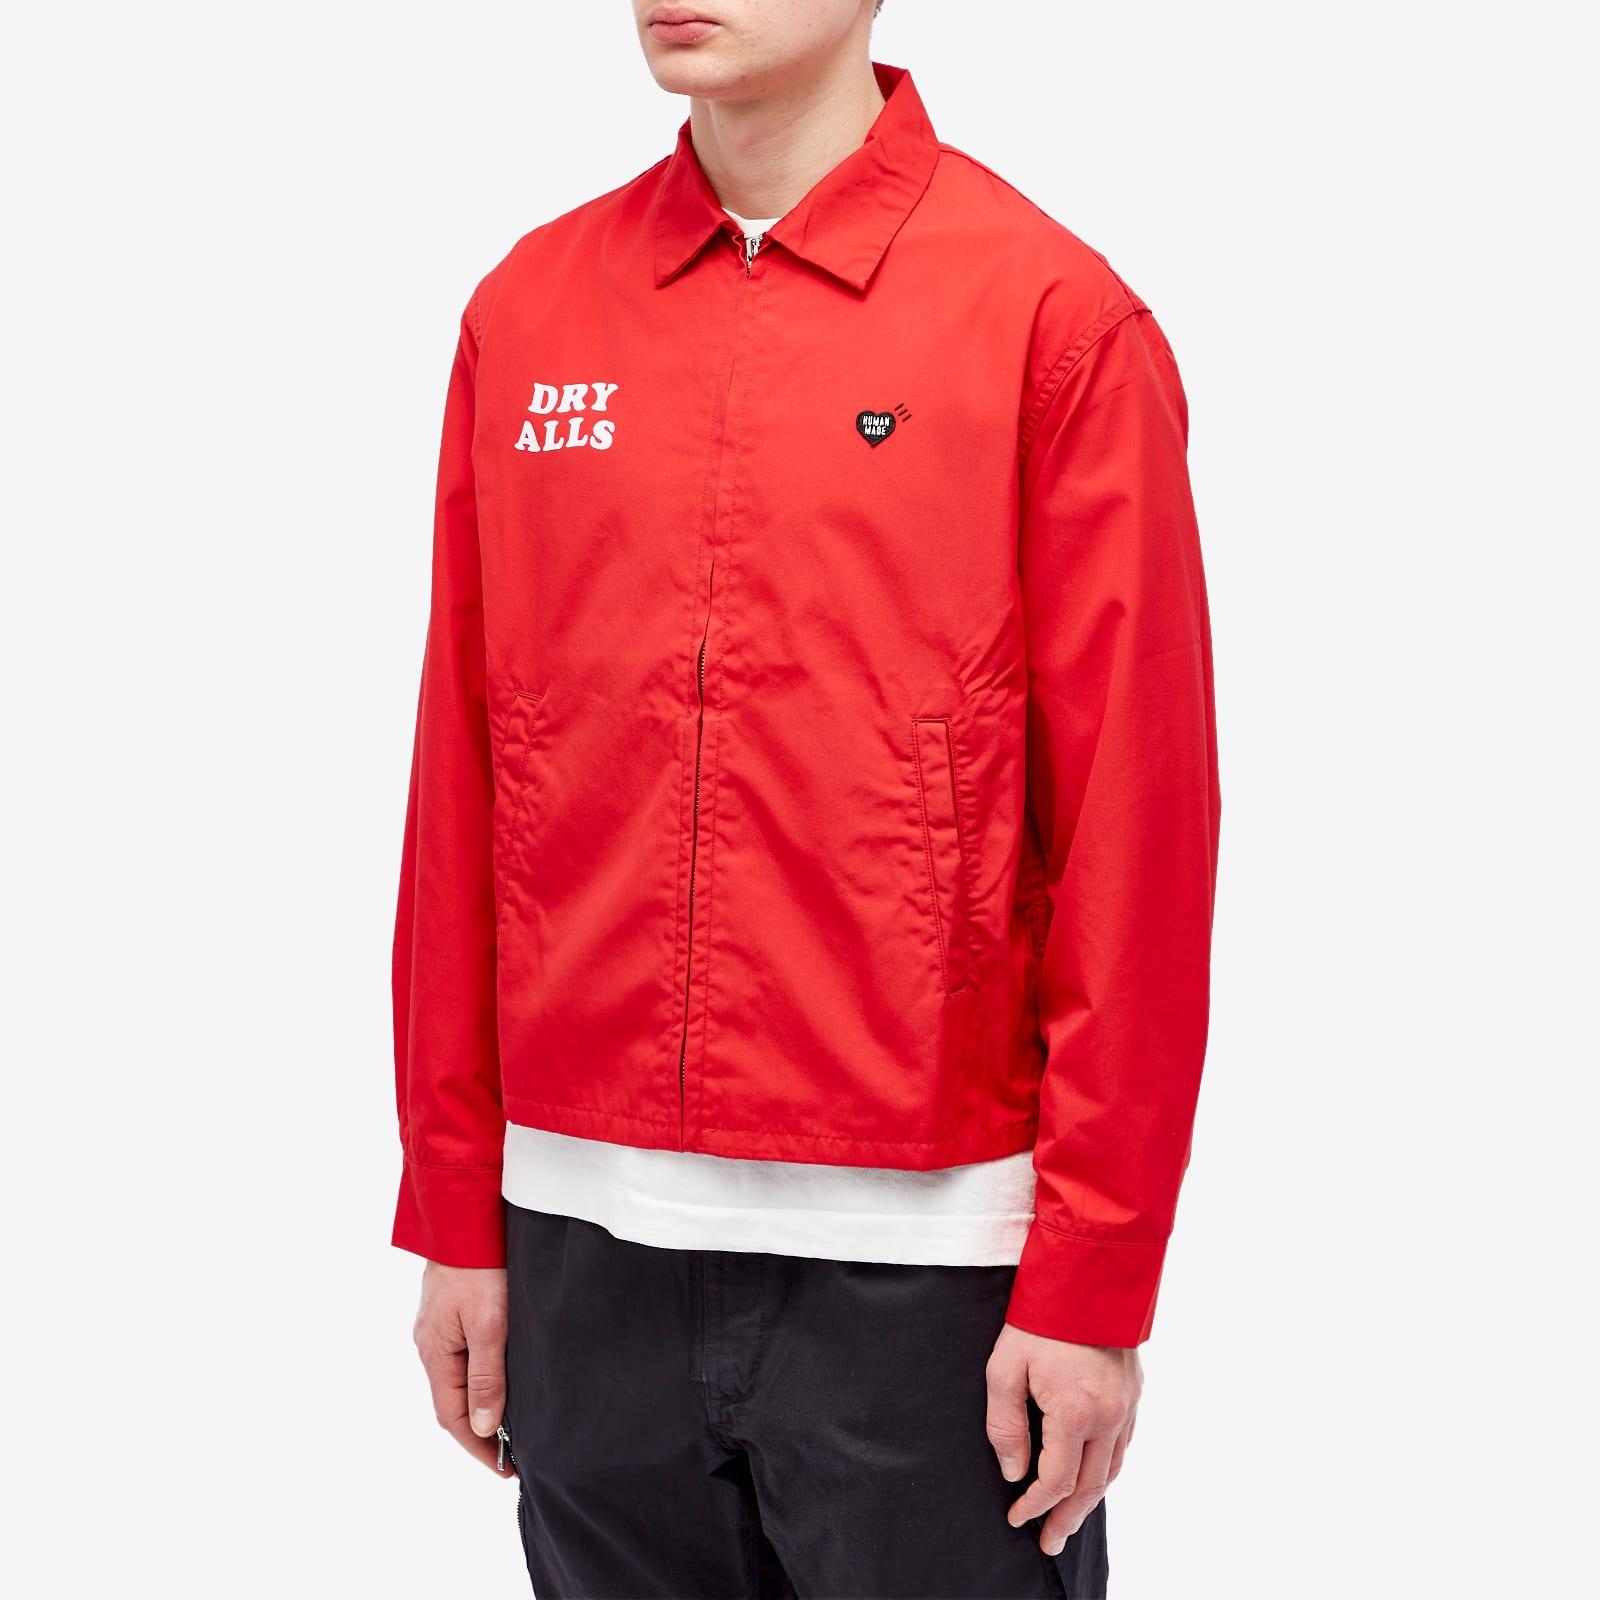 DRIZZLER JACKET human made